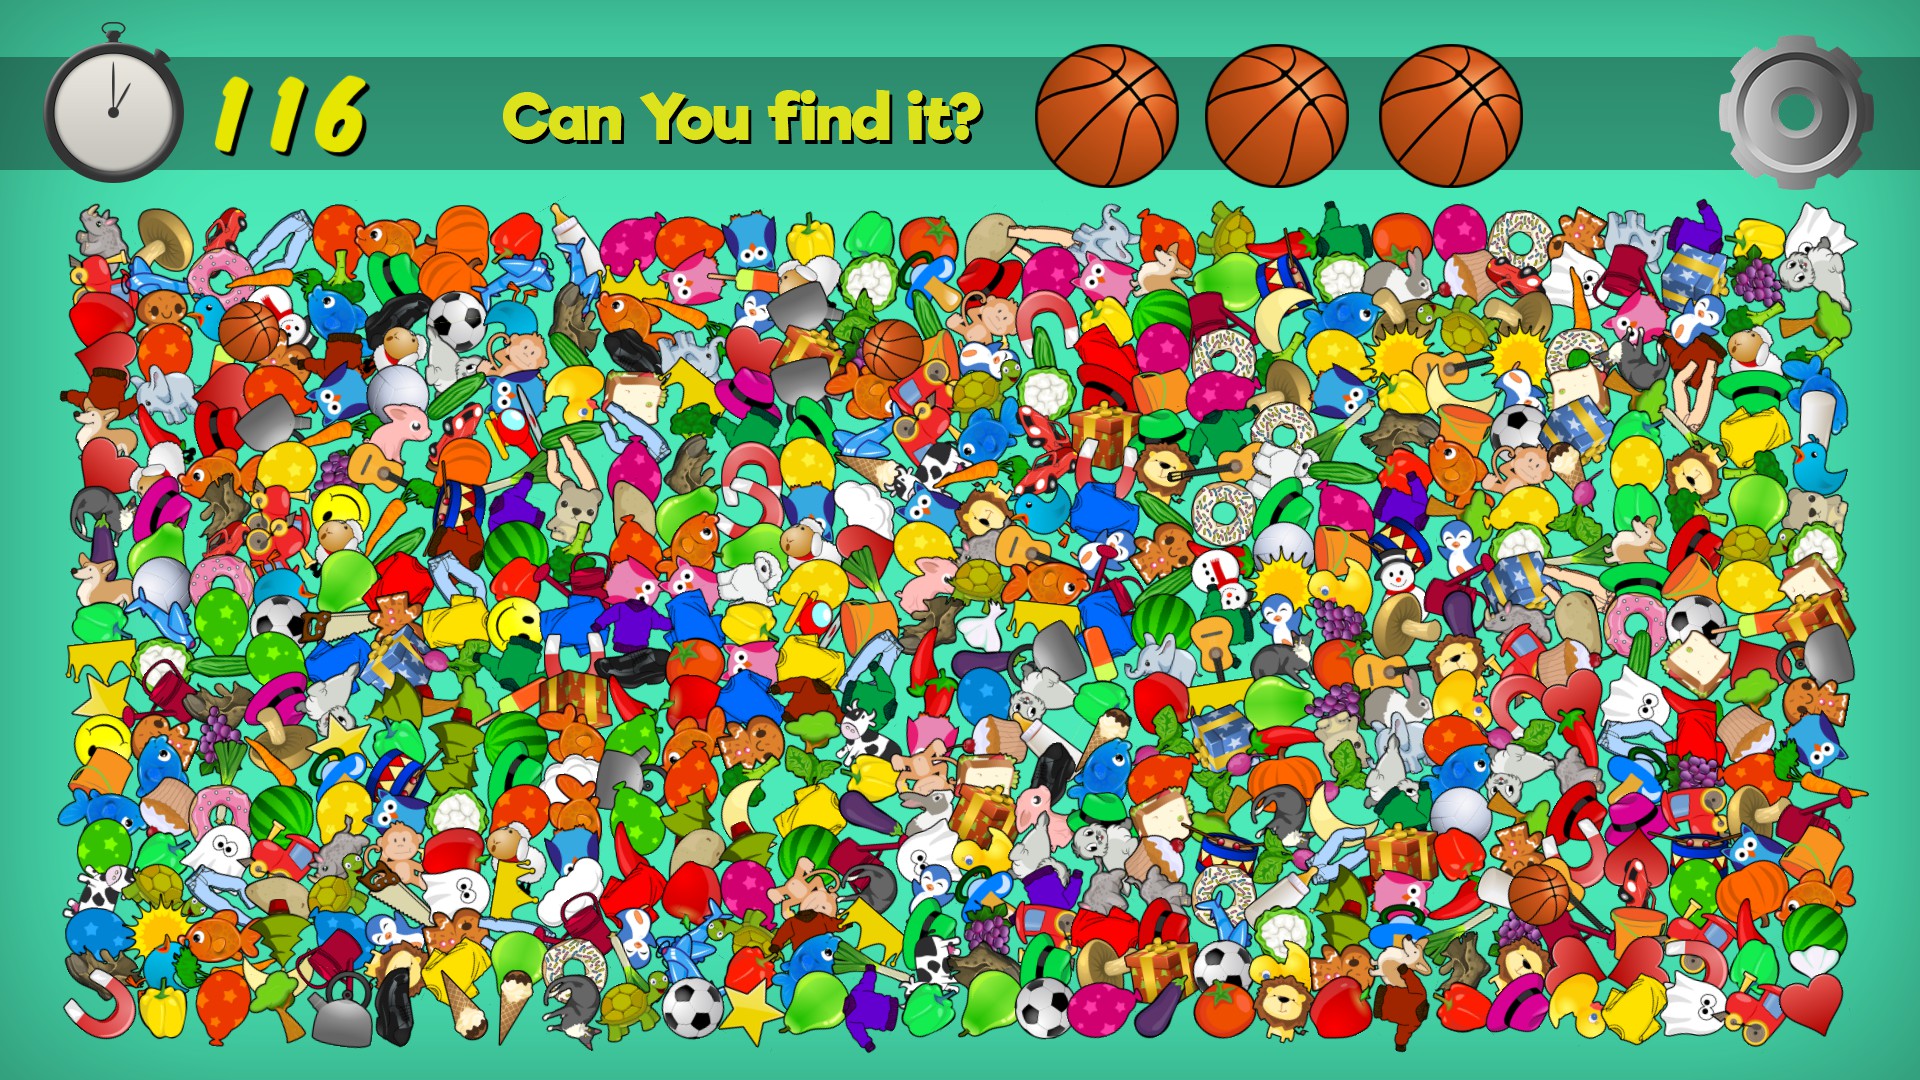 Games you can download. Игра find. Игра can you. Can you find. Found it игра.